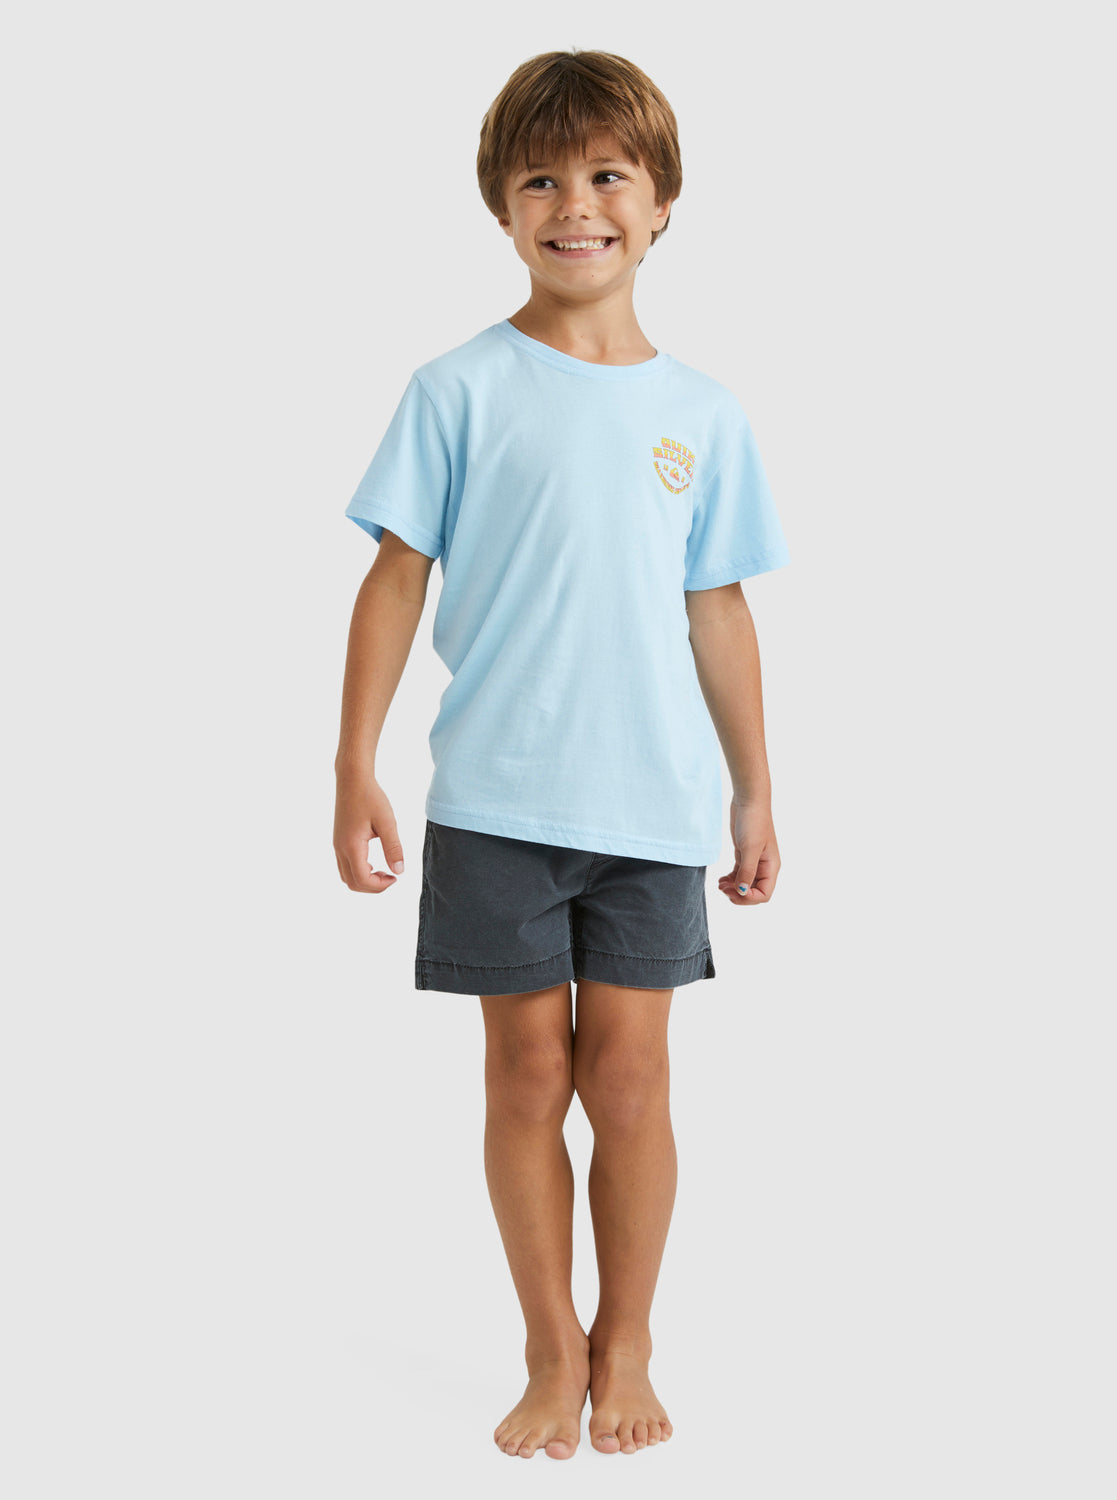 Quiksilver Backside Snap Boys Tee in clear sky colour from front